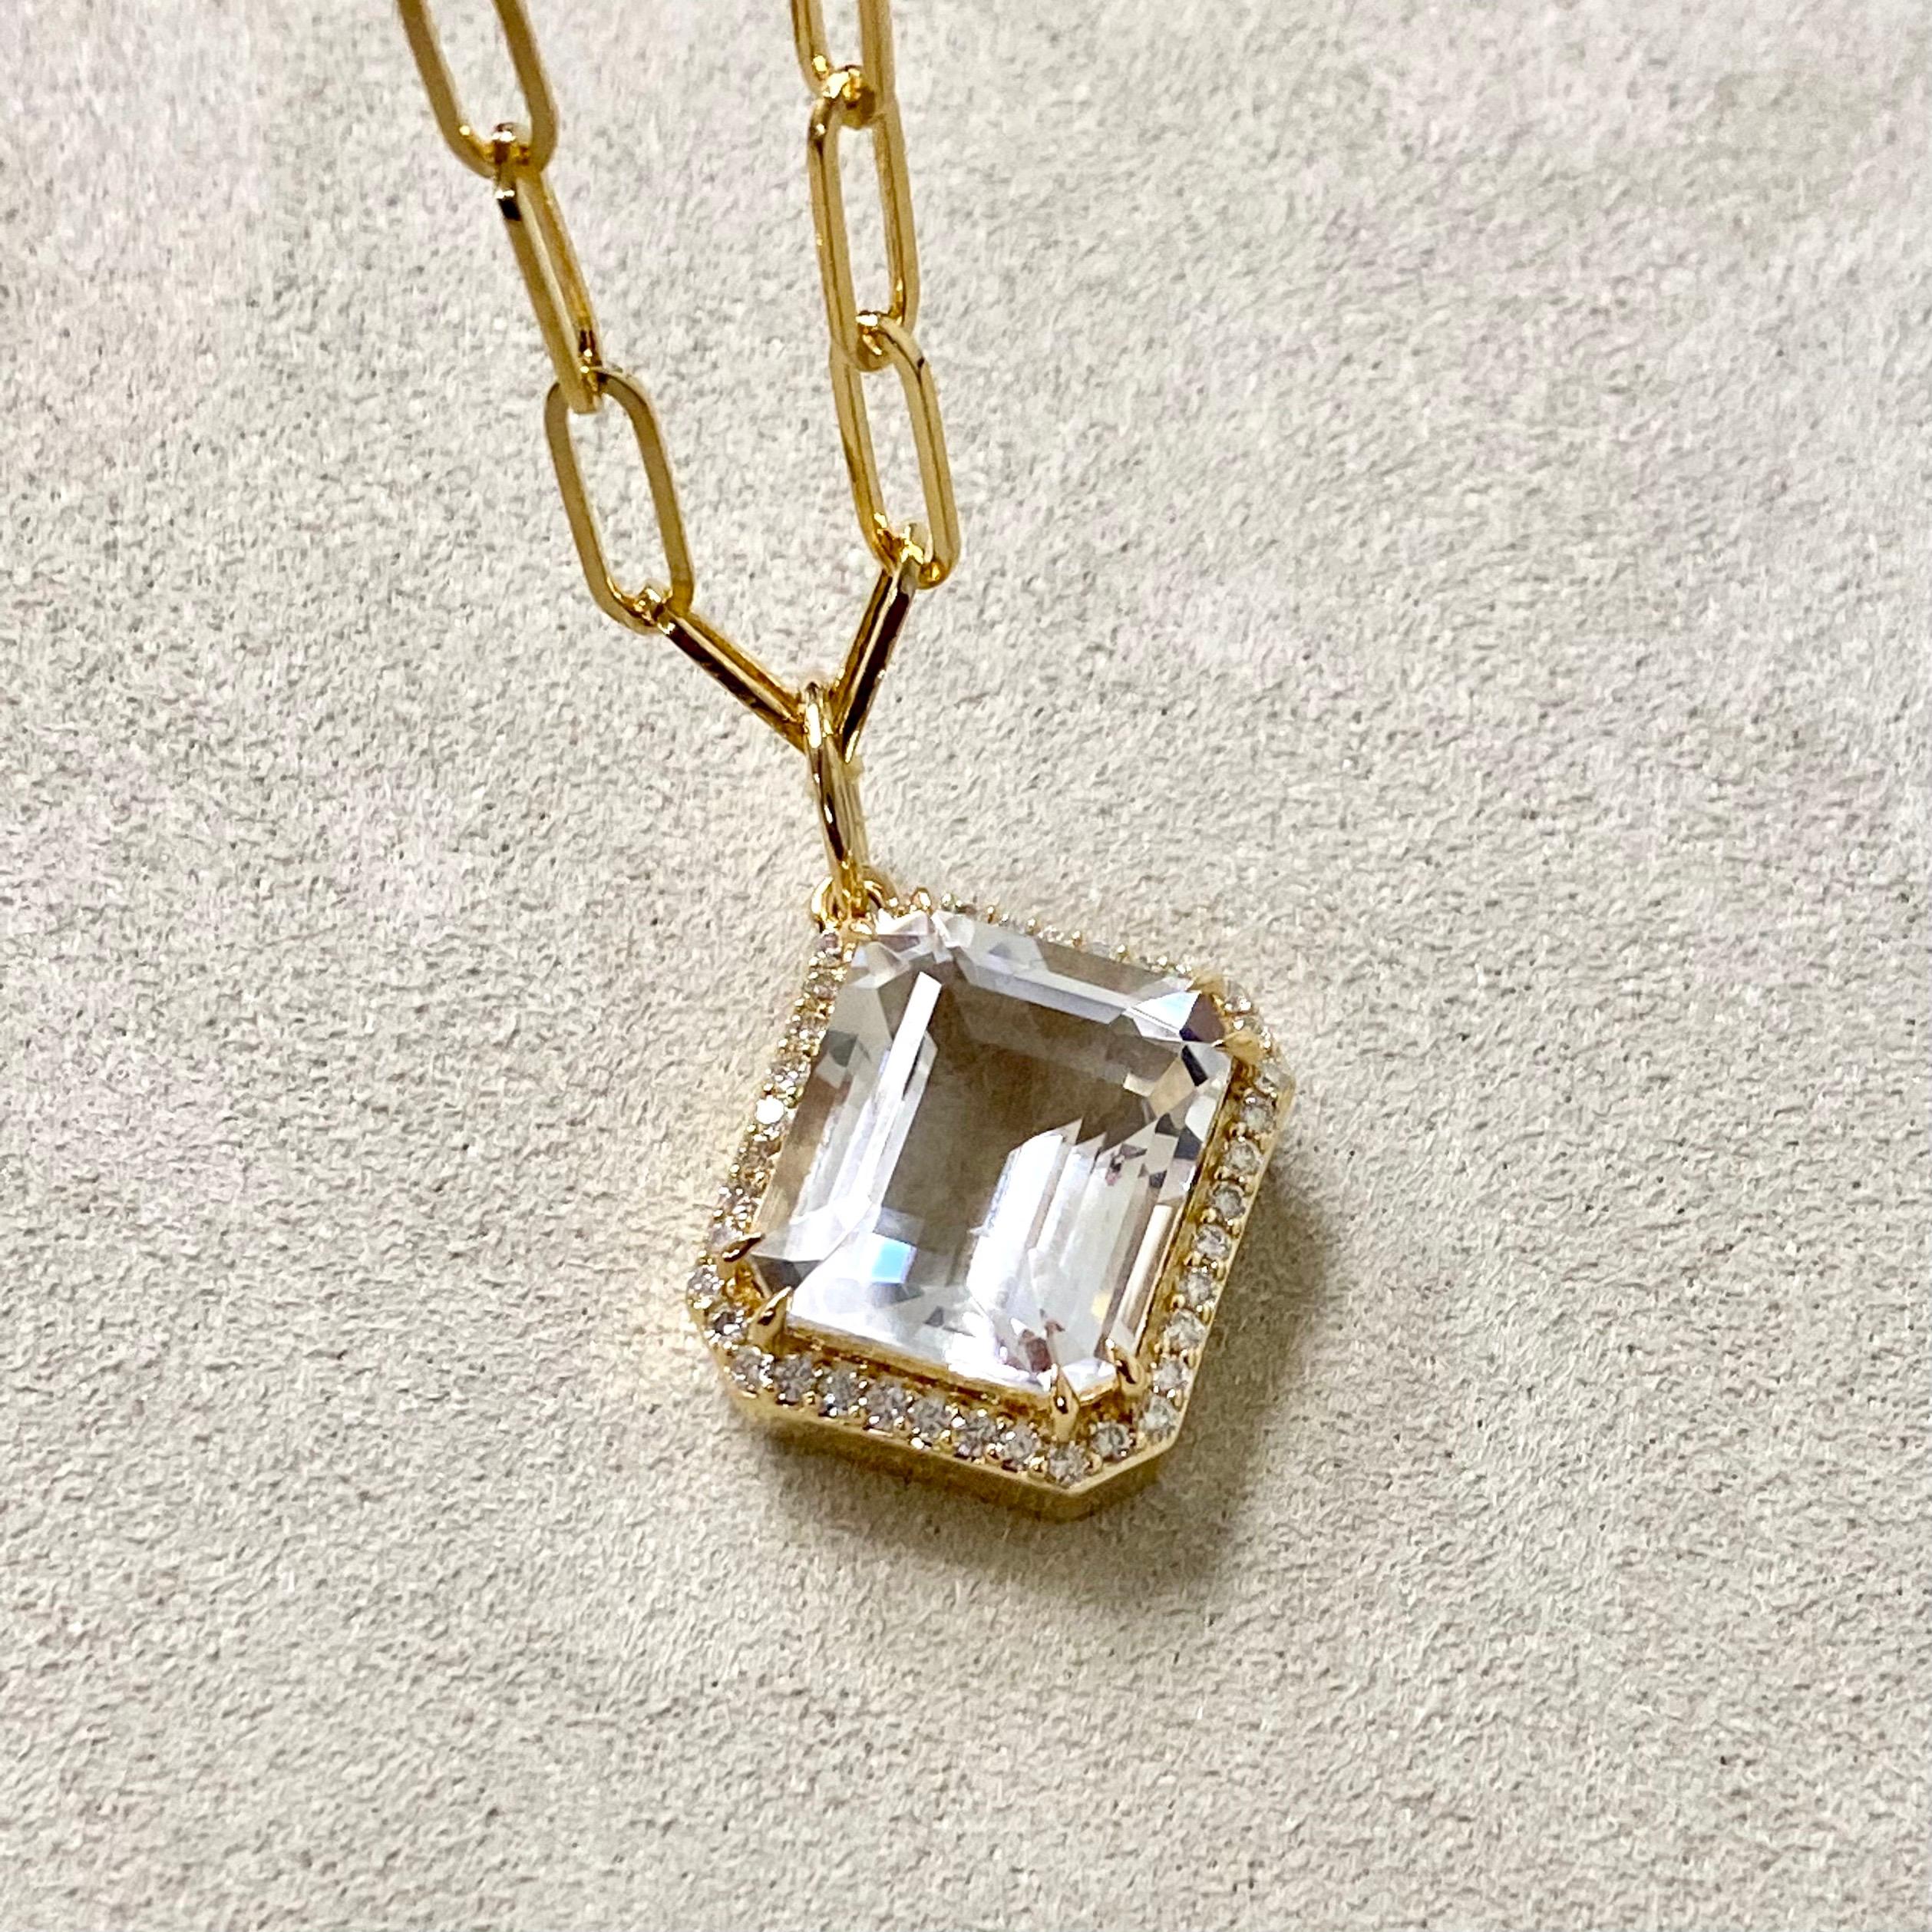 Created in 18k yellow gold
Rock crystal 9 carats approx.
Champagne diamonds 0.40 carat approx.
Chain sold separately 


About the Designers ~ Dharmesh & Namrata

Drawing inspiration from little things, Dharmesh & Namrata Kothari have created an